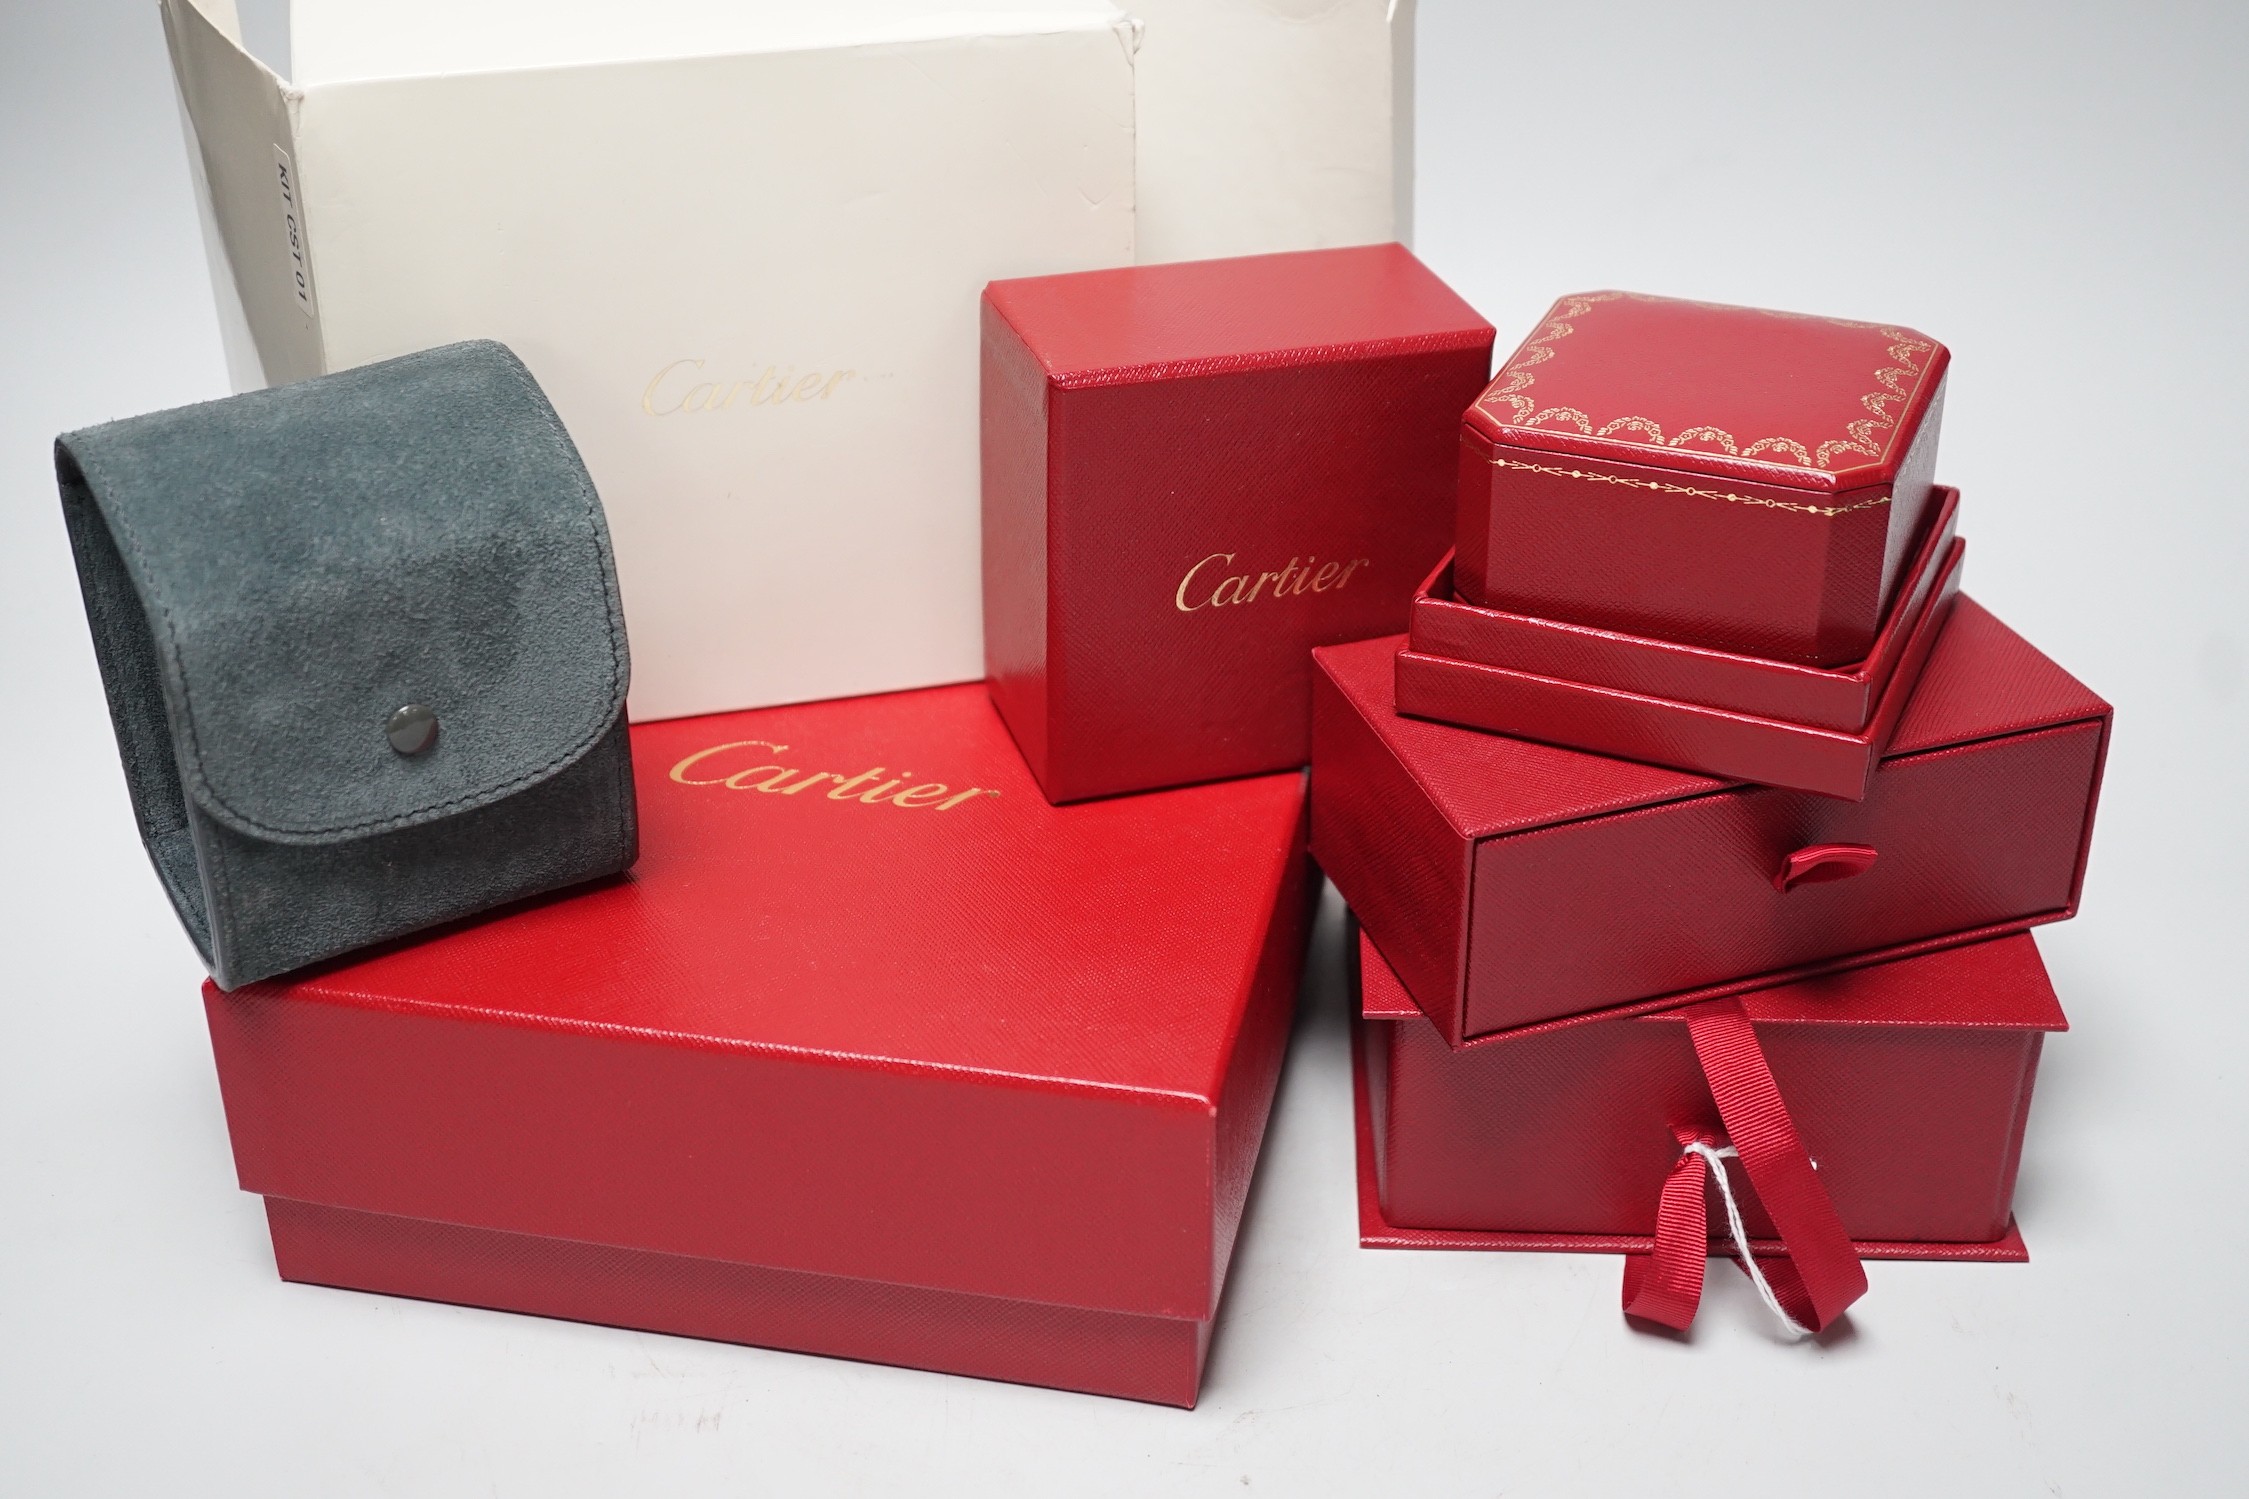 Six various Cartier boxes and Cartier pouches